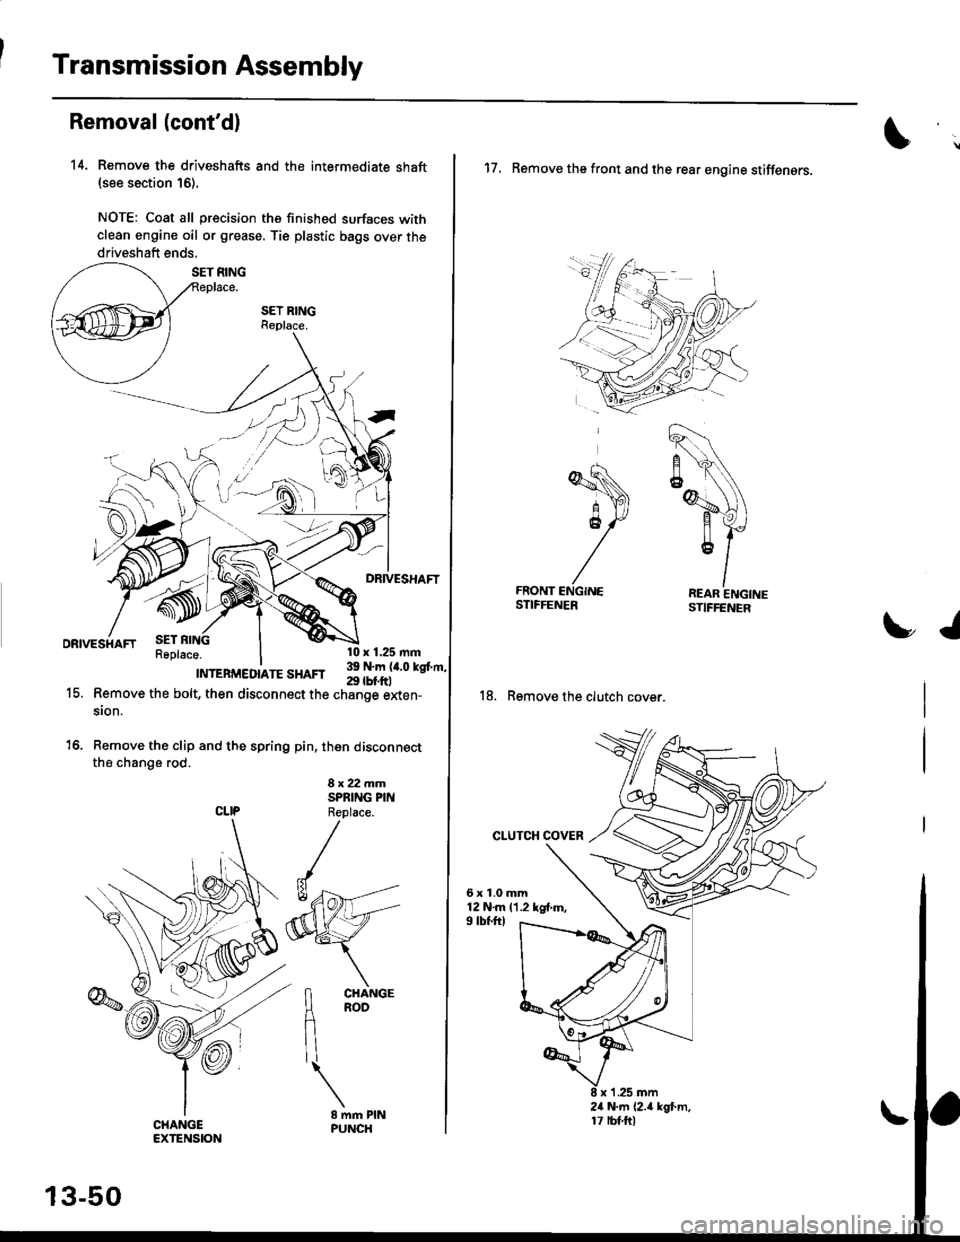 HONDA CIVIC 1996 6.G Workshop Manual Transmission Assembly
Removal(contd)
14. Remove the driveshafts and the intermediate shaft(see section 16).
NOTE: Coat all precision the finished surfaces with
clean engine oil or grease. Tie plastic